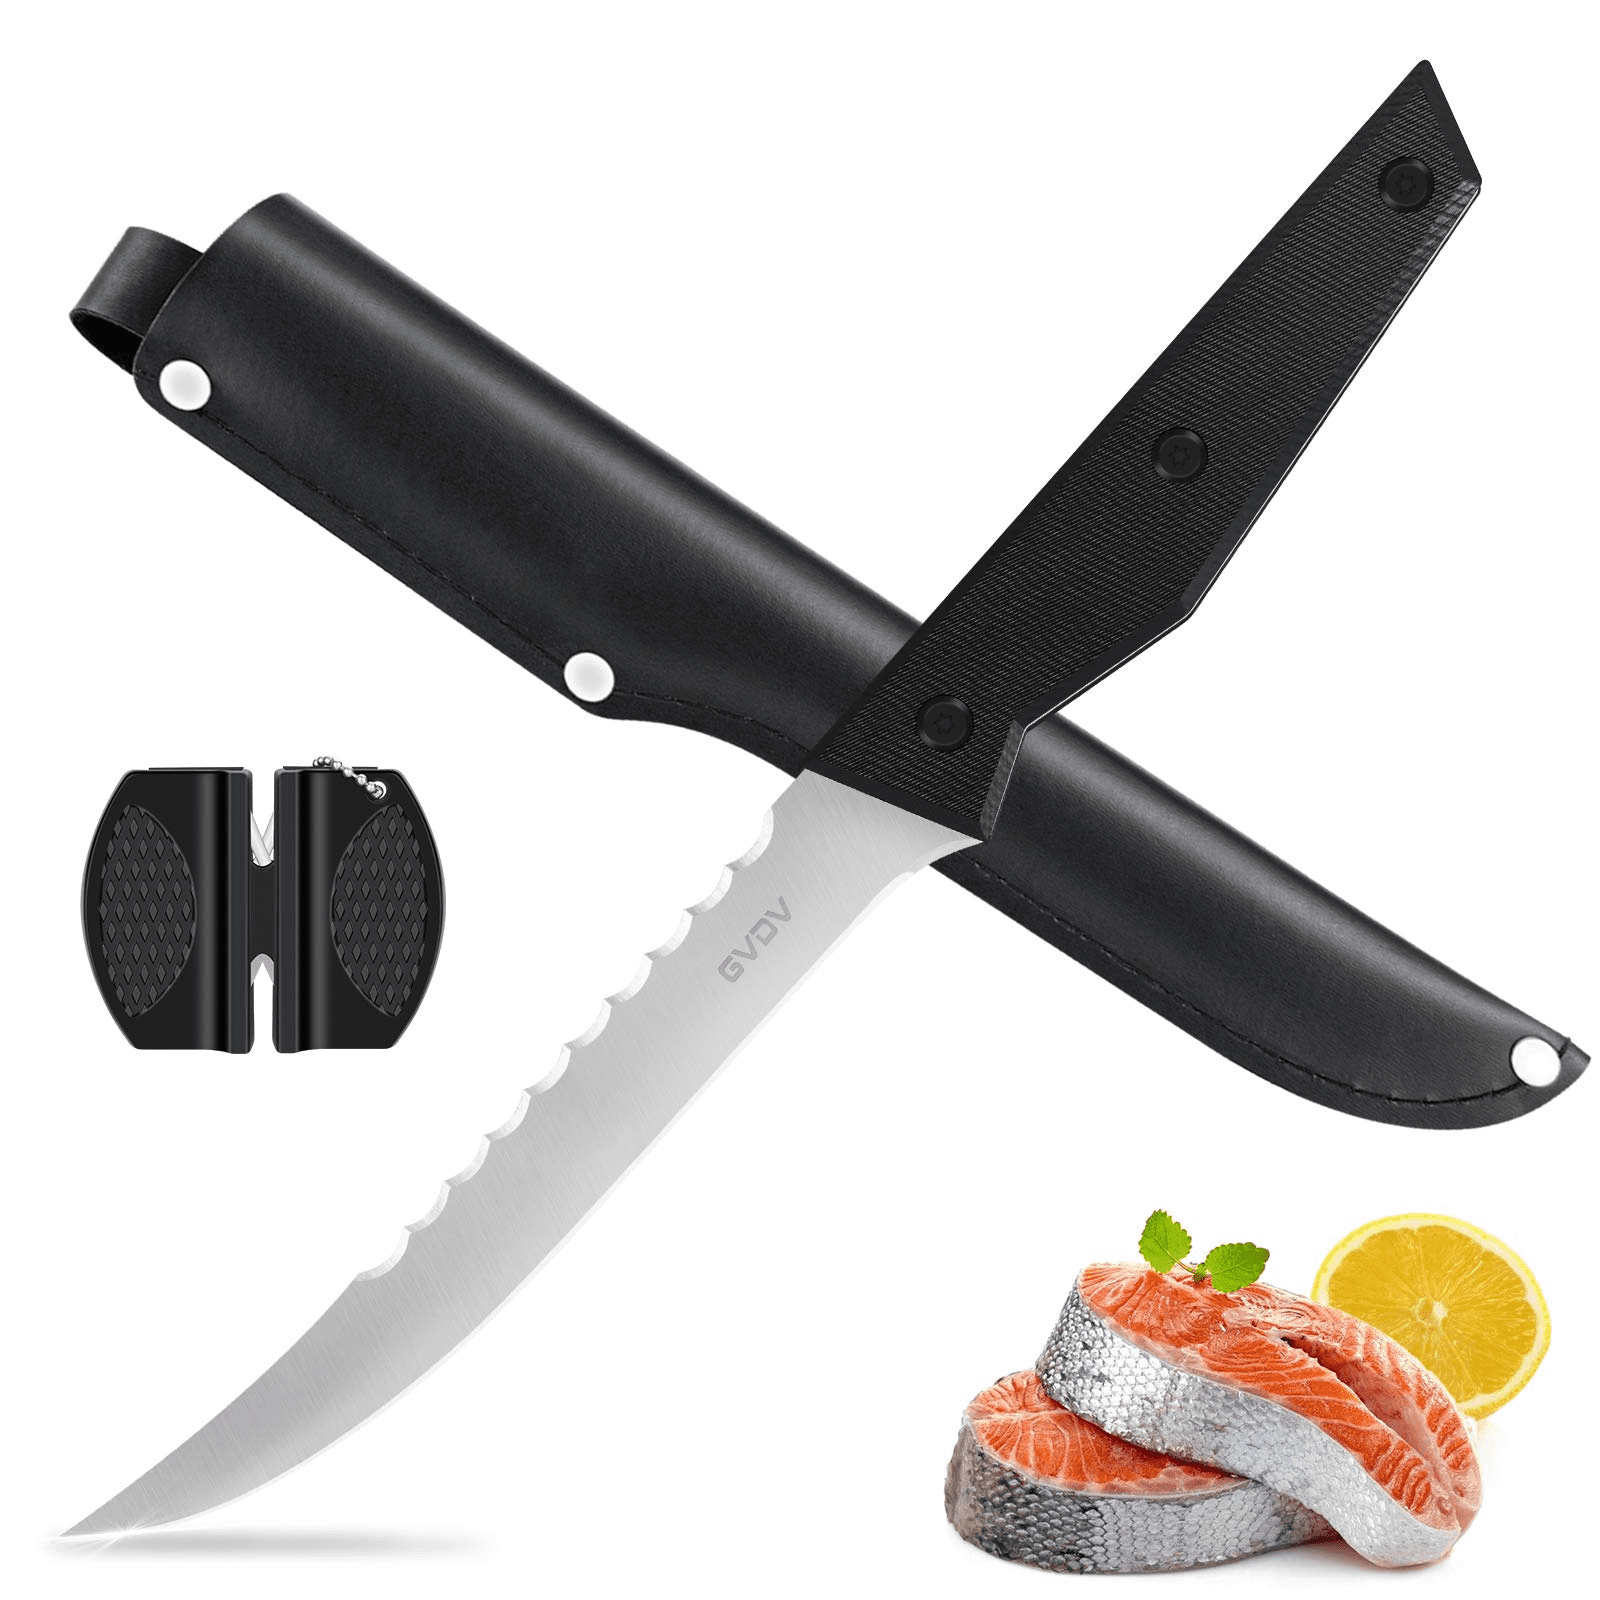  BLUEWING Fillet Knife 1pc Stainless-Steel Blade Fishing Filet  Knife Boning Knife with Non-Slip Handles and Protective Sheath, Size 7 in :  Sports & Outdoors